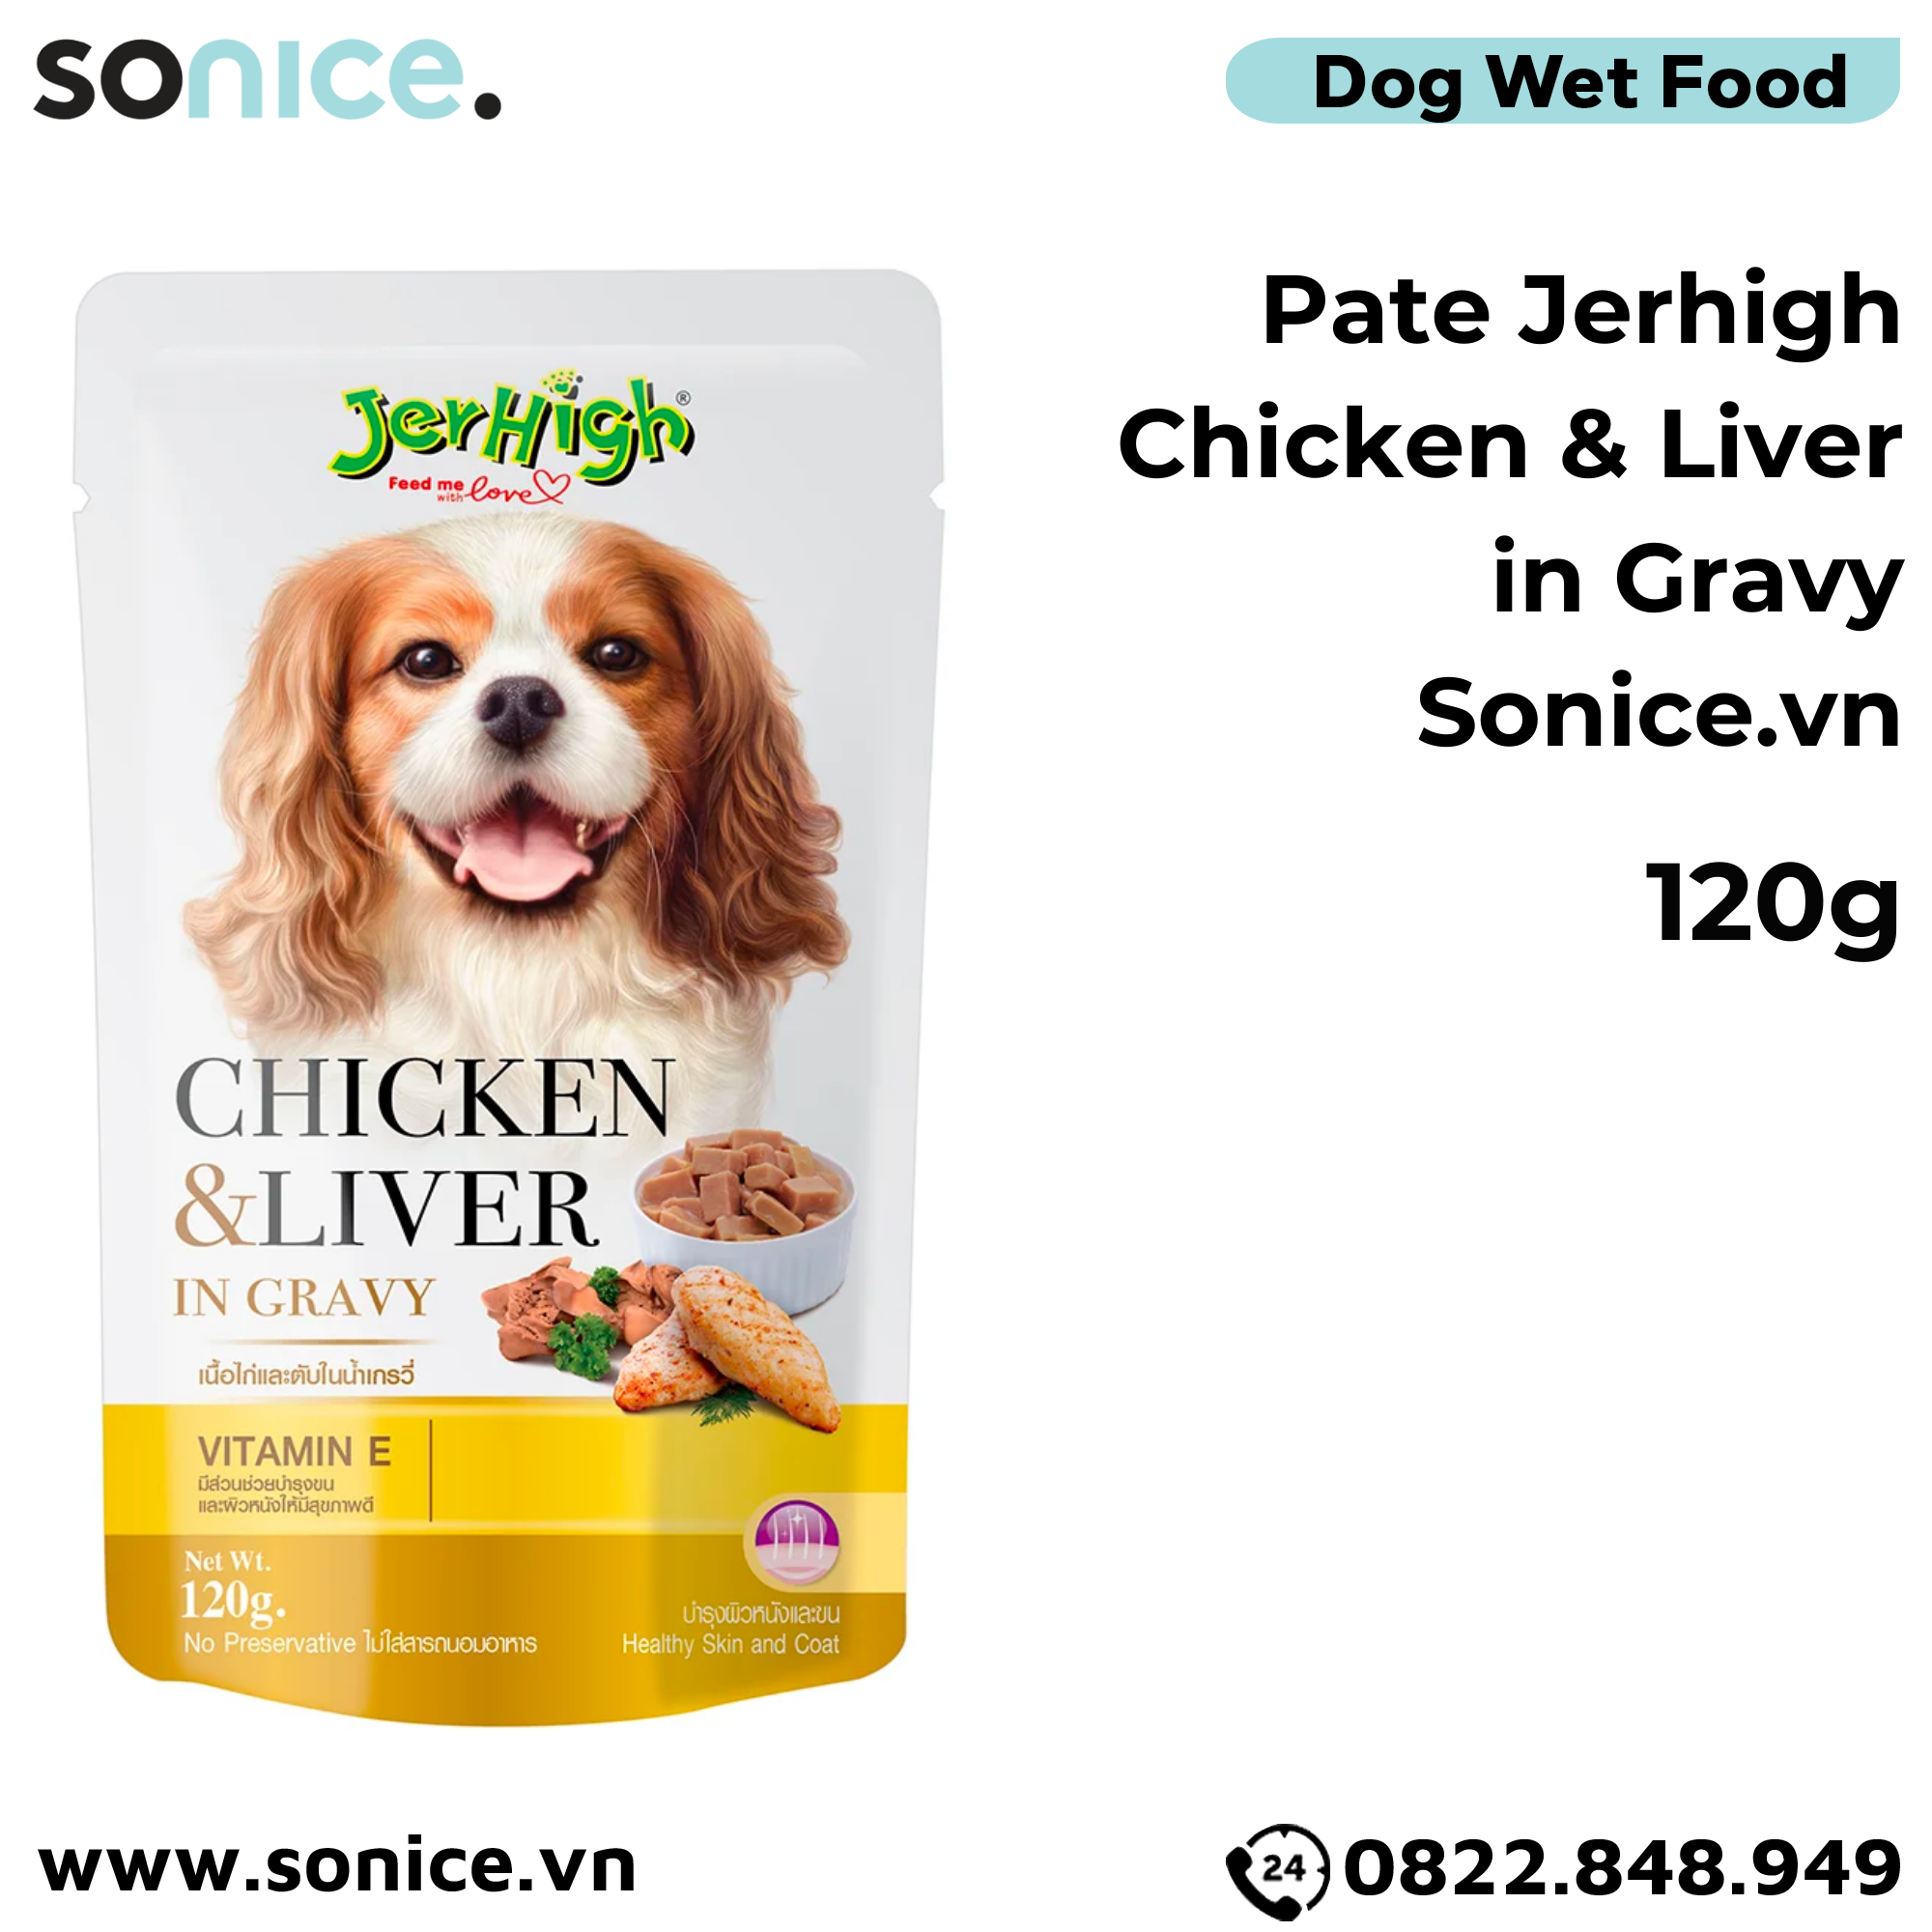  Combo Pate Jerhigh Chicken, Duck, Beef, Liver & Vegetable in Gravy 120g - mix vị 48 gói SONICE. 